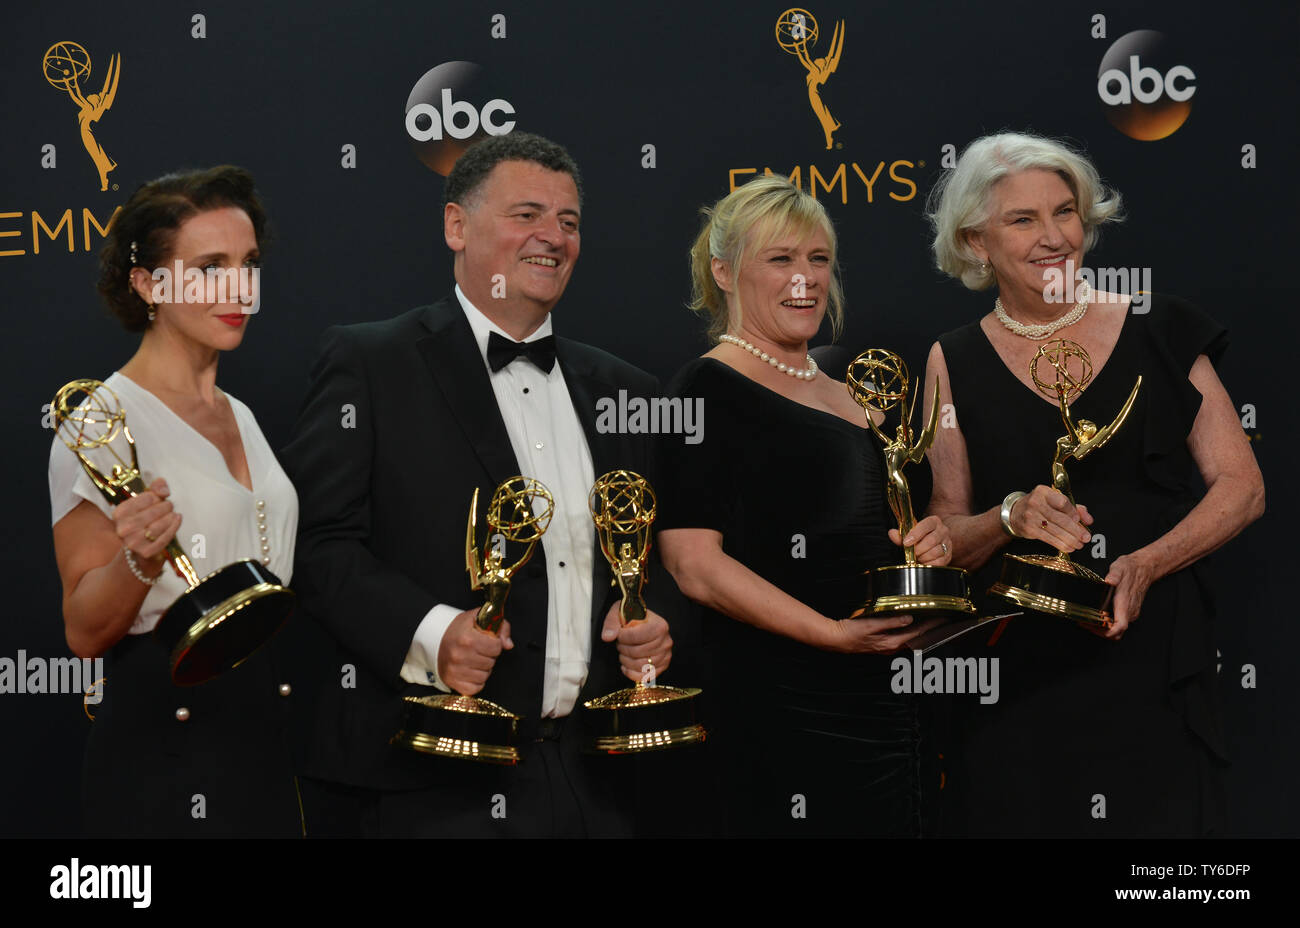 Actress Amanda Abbington and producers Steven Moffat, Sue Vertue and Rebecca Eaton appear backstage with their awards they won for Outstanding Television Movie for 'Sherlock: The Abominable Bride,' during the 68th annual Primetime Emmy Awards at Microsoft Theater in Los Angeles on September 18, 2016. Photo by Christine Chew/UPI Stock Photo